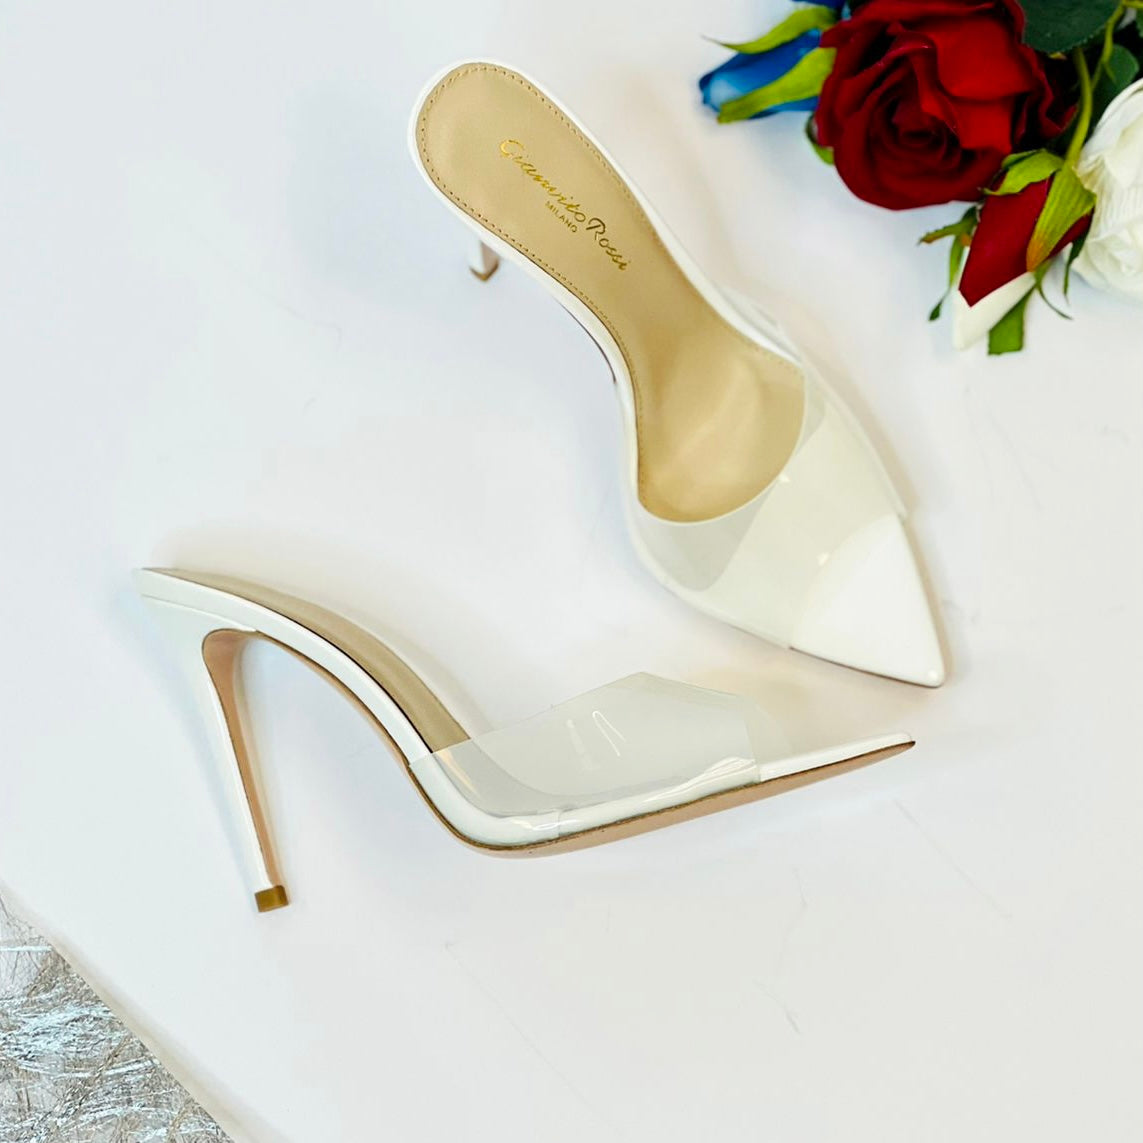 Gianvito Rossi Style #1 Shoes